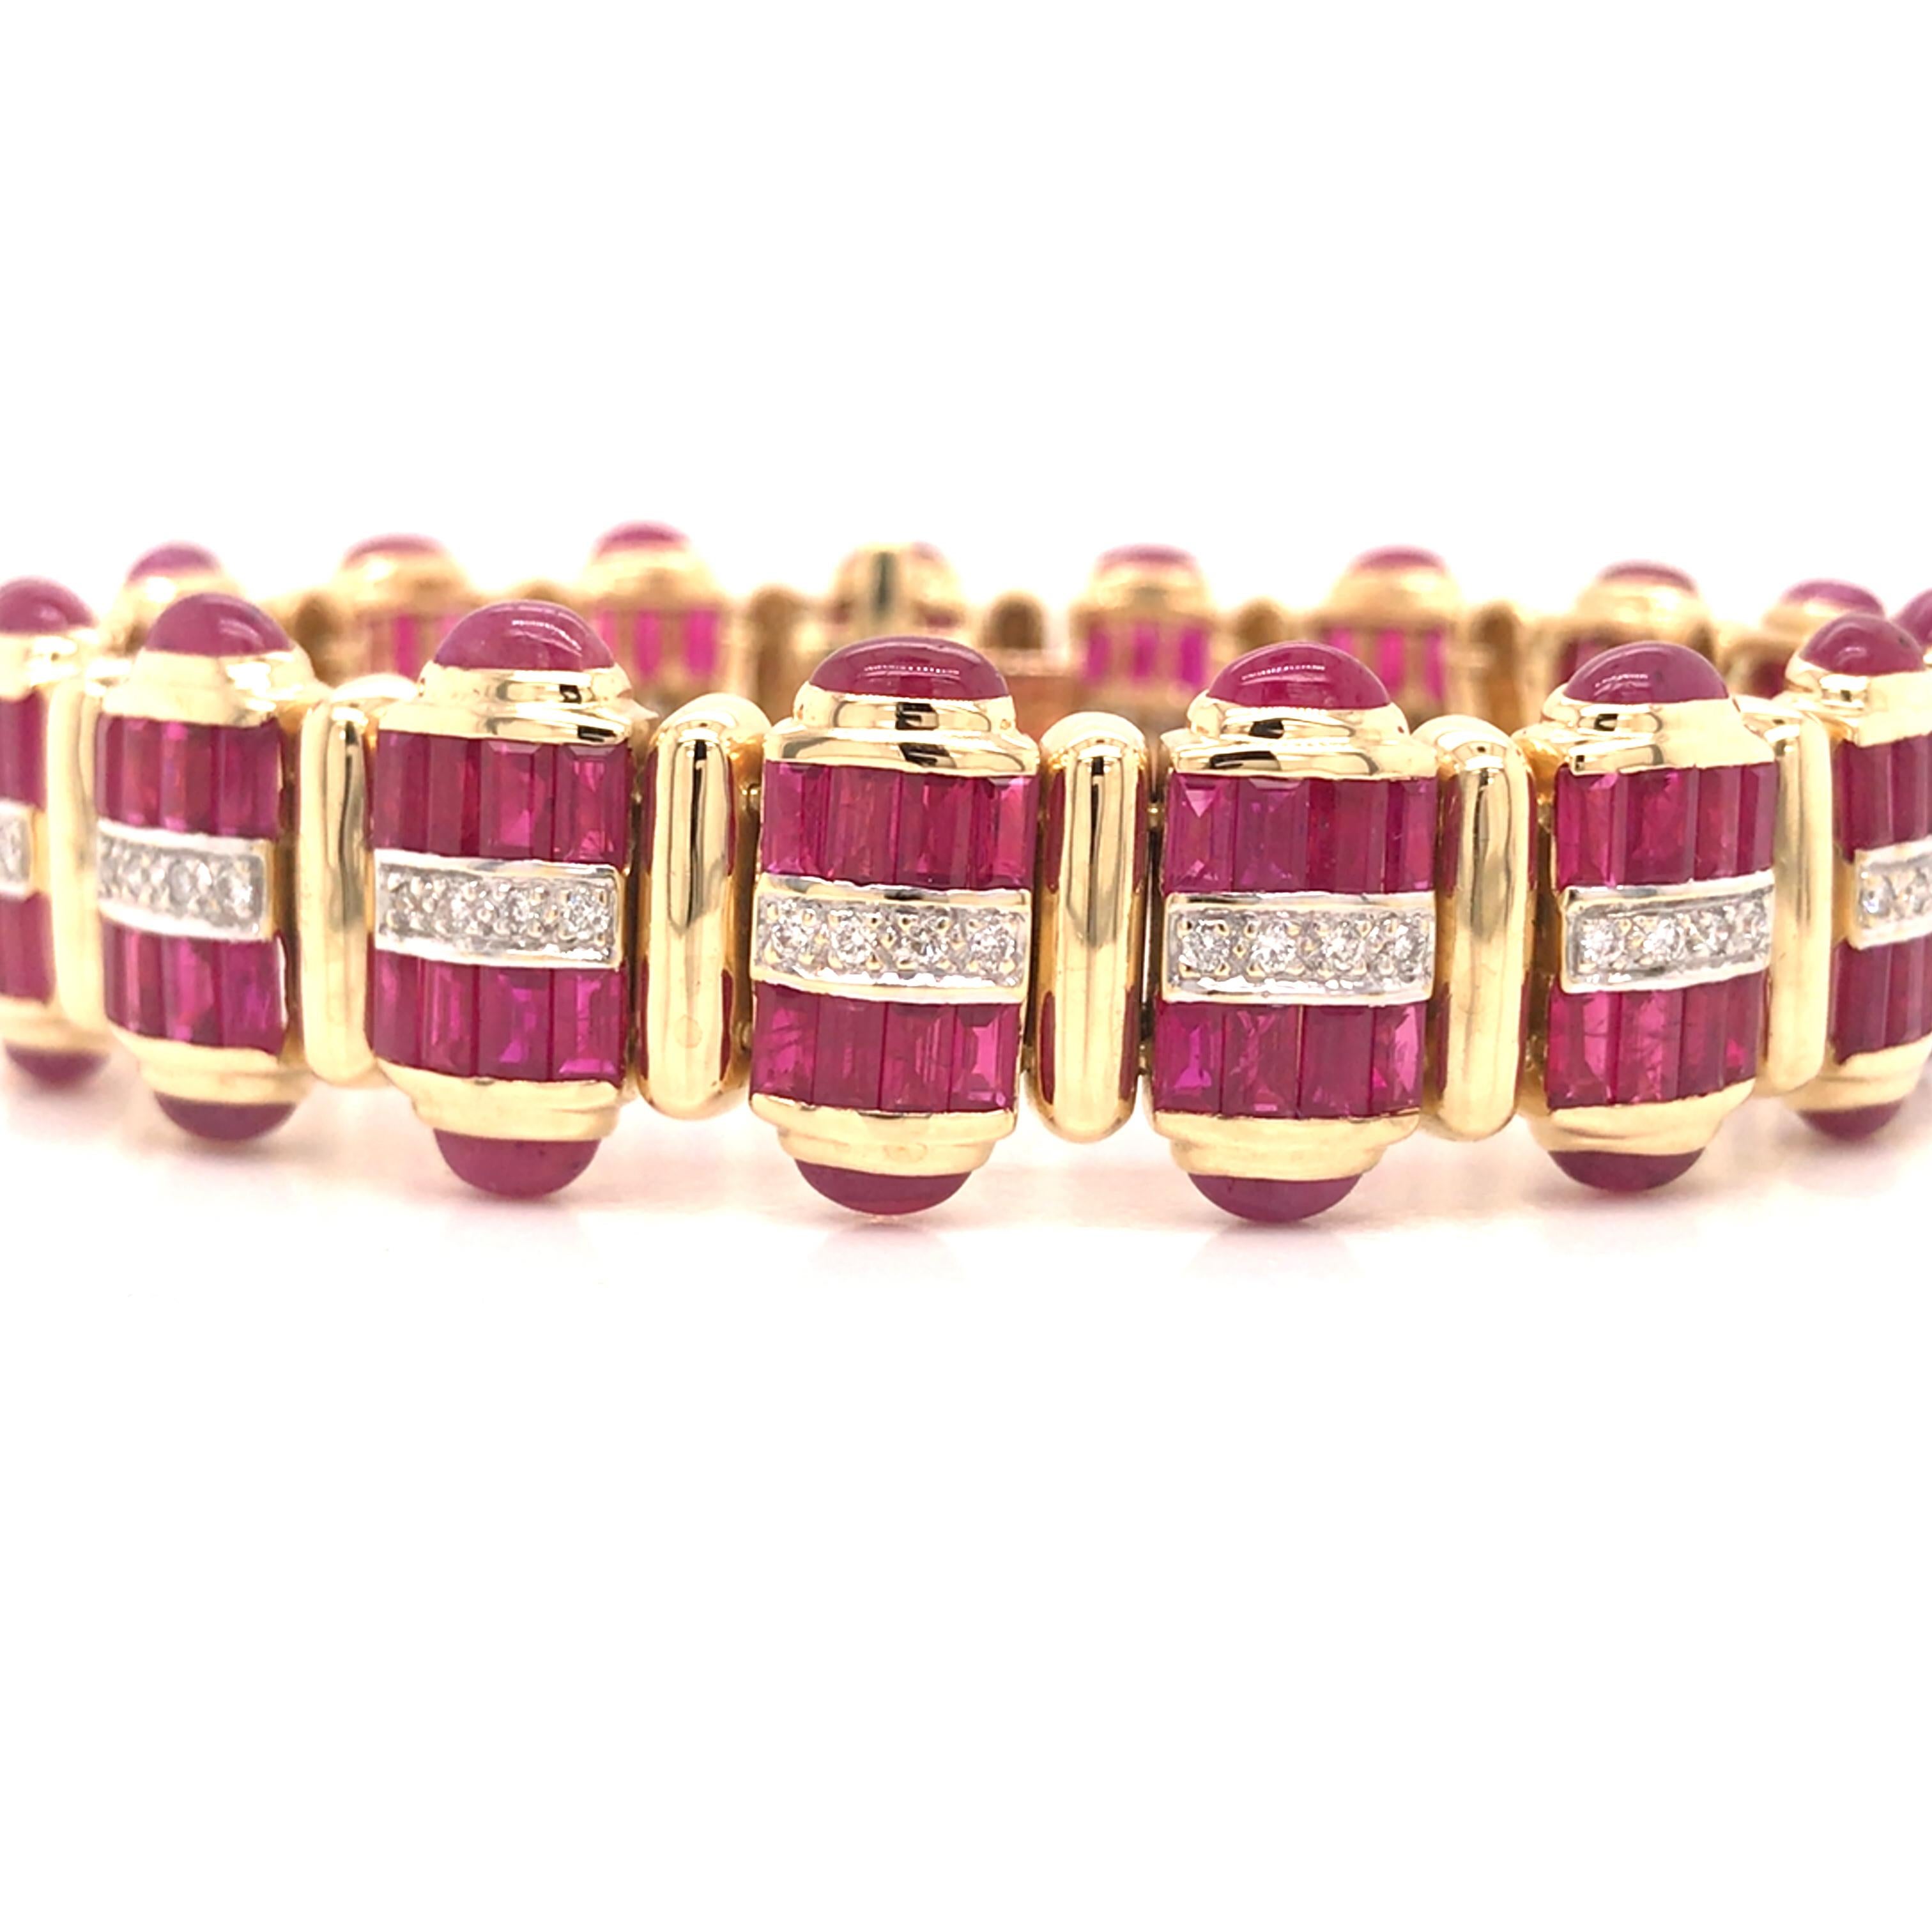 Ruby and Diamond Bracelet in 18K Yellow Gold.  Round Brilliant Cut Diamonds weighing 0.72 carat total weight, G-H in color and VS in clarity are expertly set.  The Bracelet measures 6 1/2 inch in length and 3/8 inch in width.  40.9 grams.